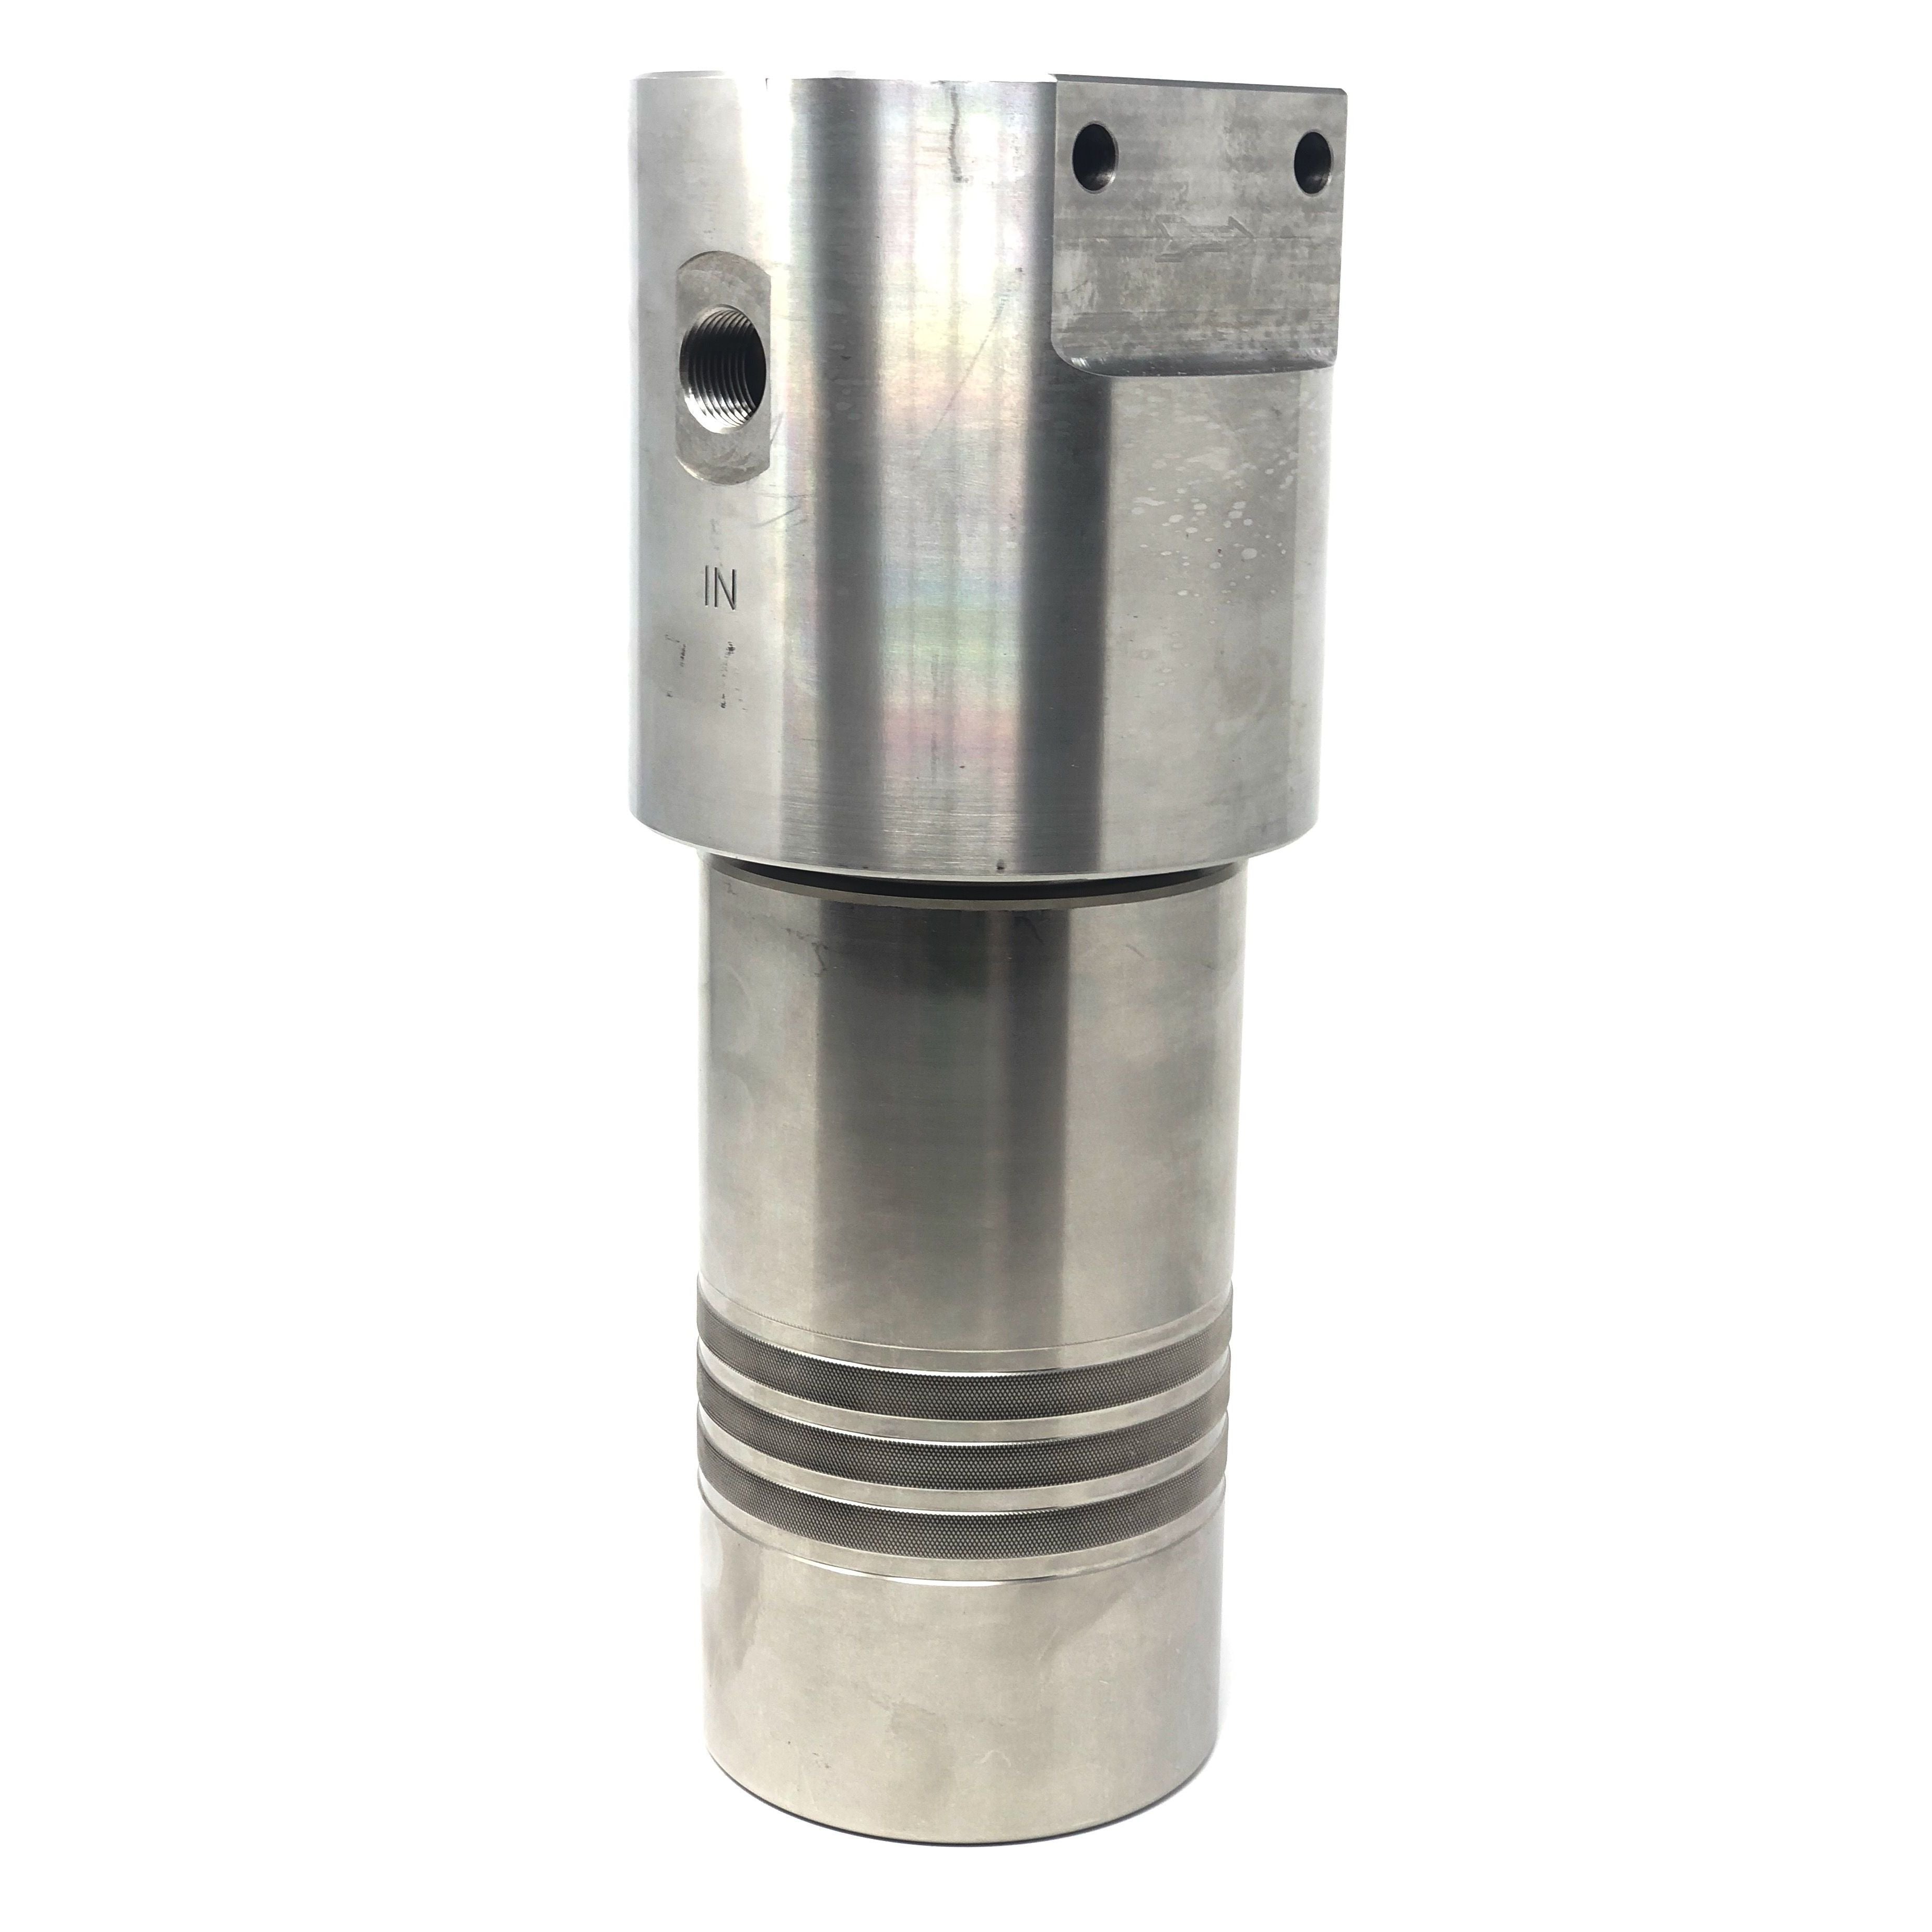 52S-2412S-10SEN : Chase Ultra High Pressure Inline Filter, 10000psi, #12 SAE (3/4"), 10 Micron, With Visual Indicator, No Bypass